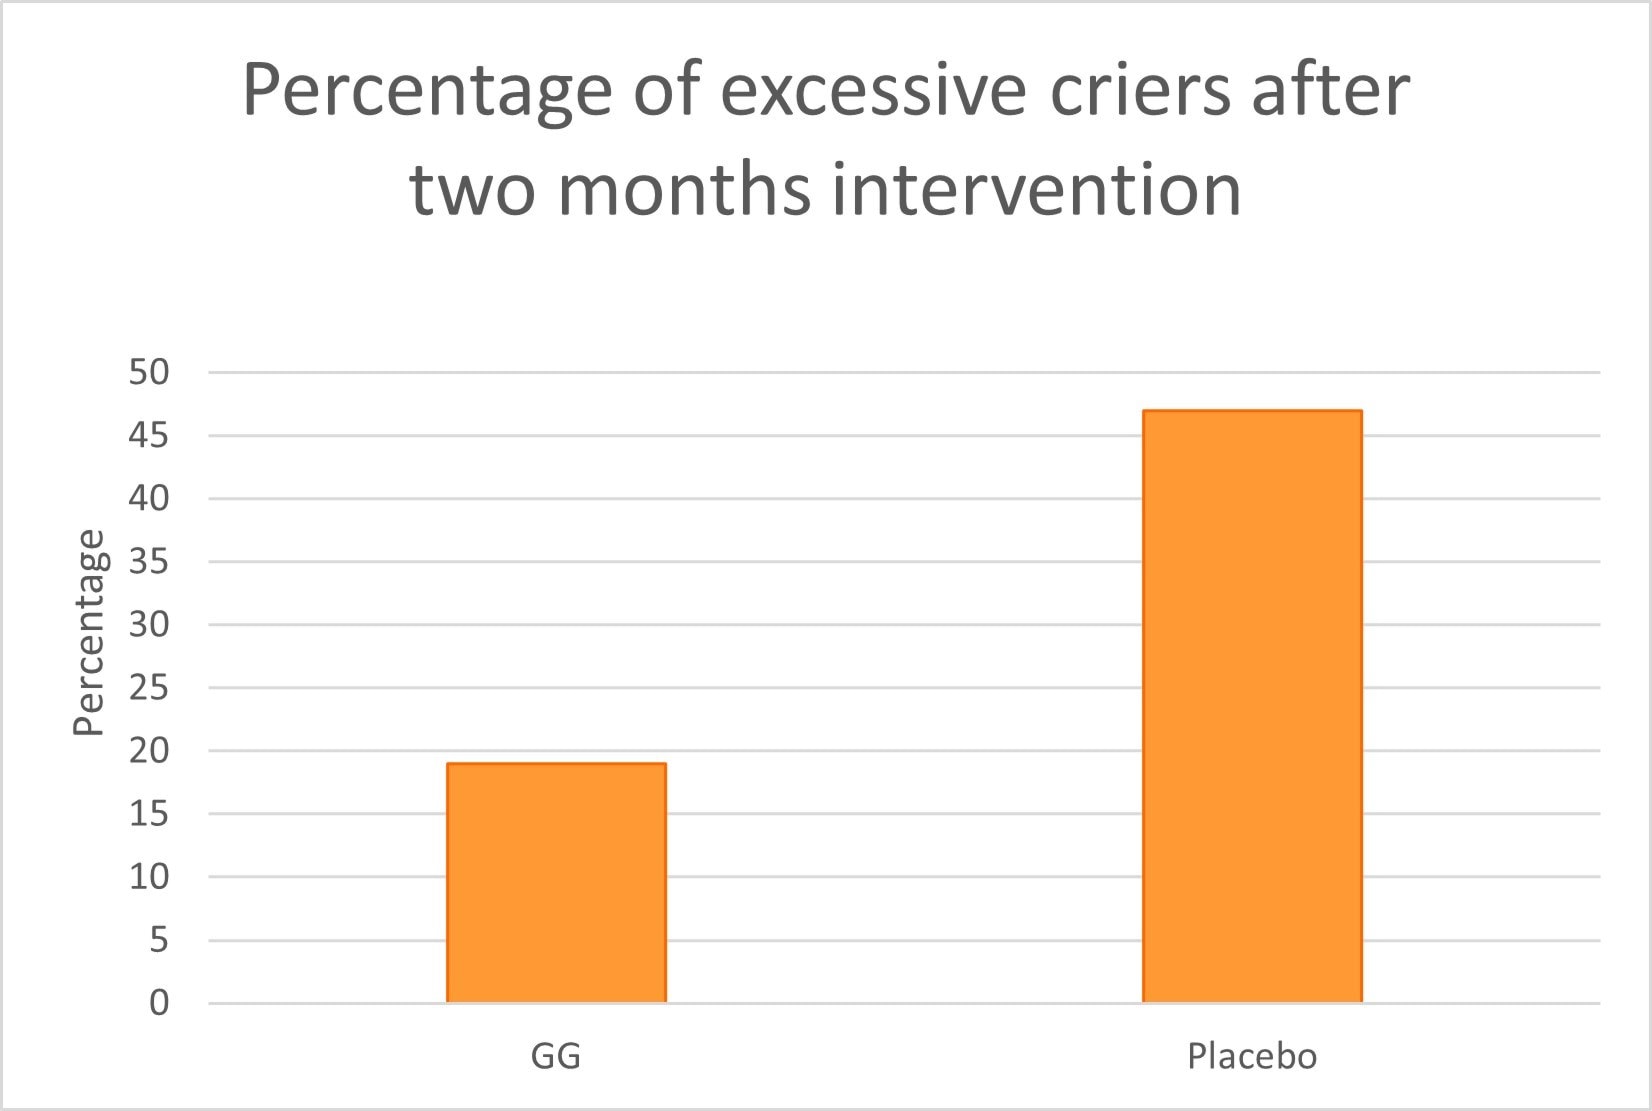 Graph 5- Excessive criers in the probiotic and placebo groups after the intervention period. 